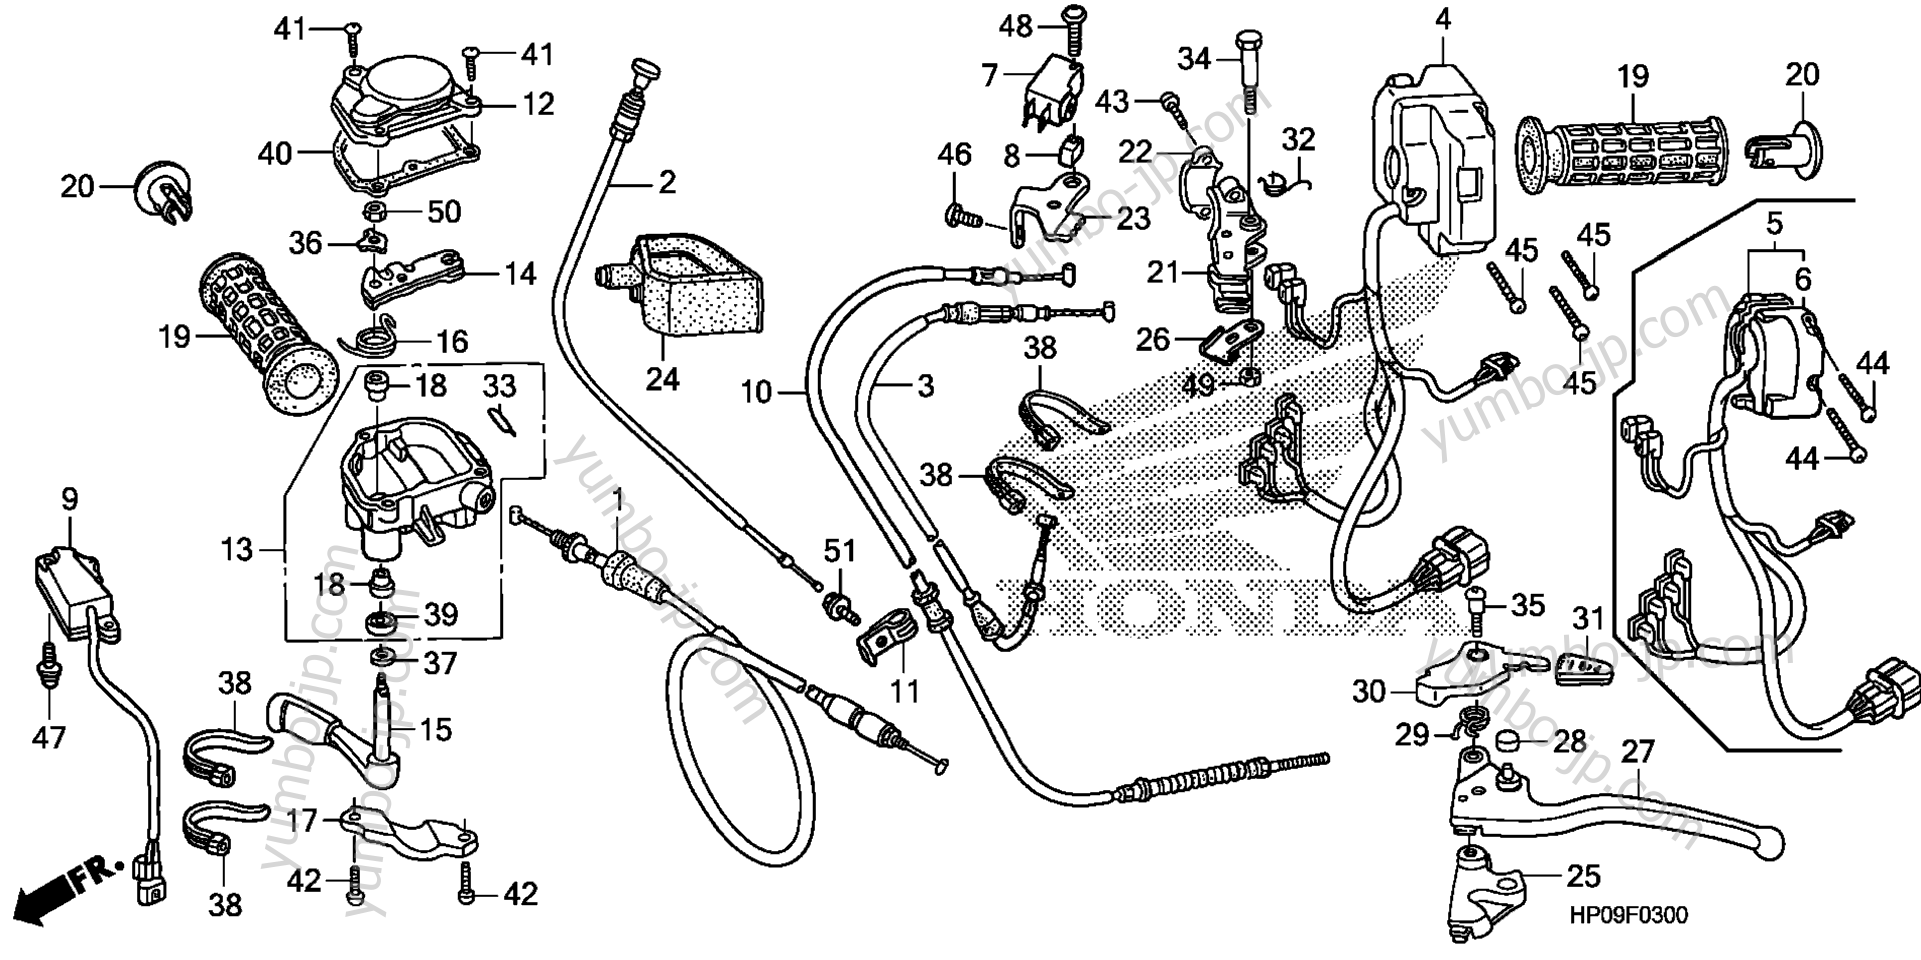 HANDLE LEVER / SWITCH / CABLE for ATVs HONDA TRX500FE 2A 2009 year